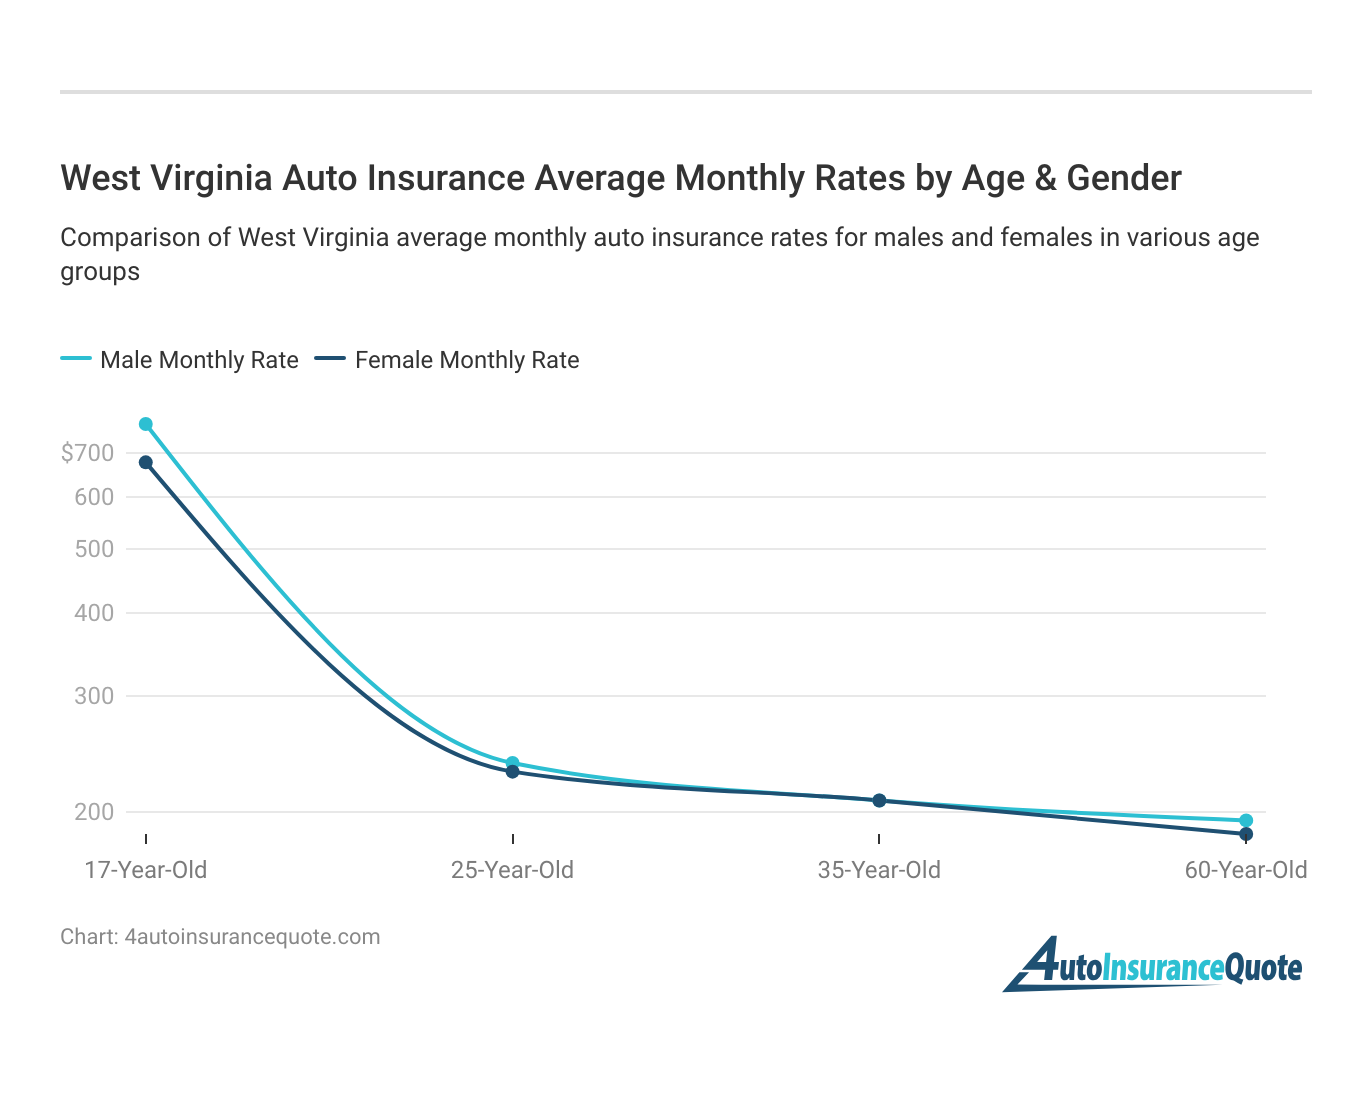 <h3>West Virginia Auto Insurance Average Monthly Rates by Age & Gender</h3>